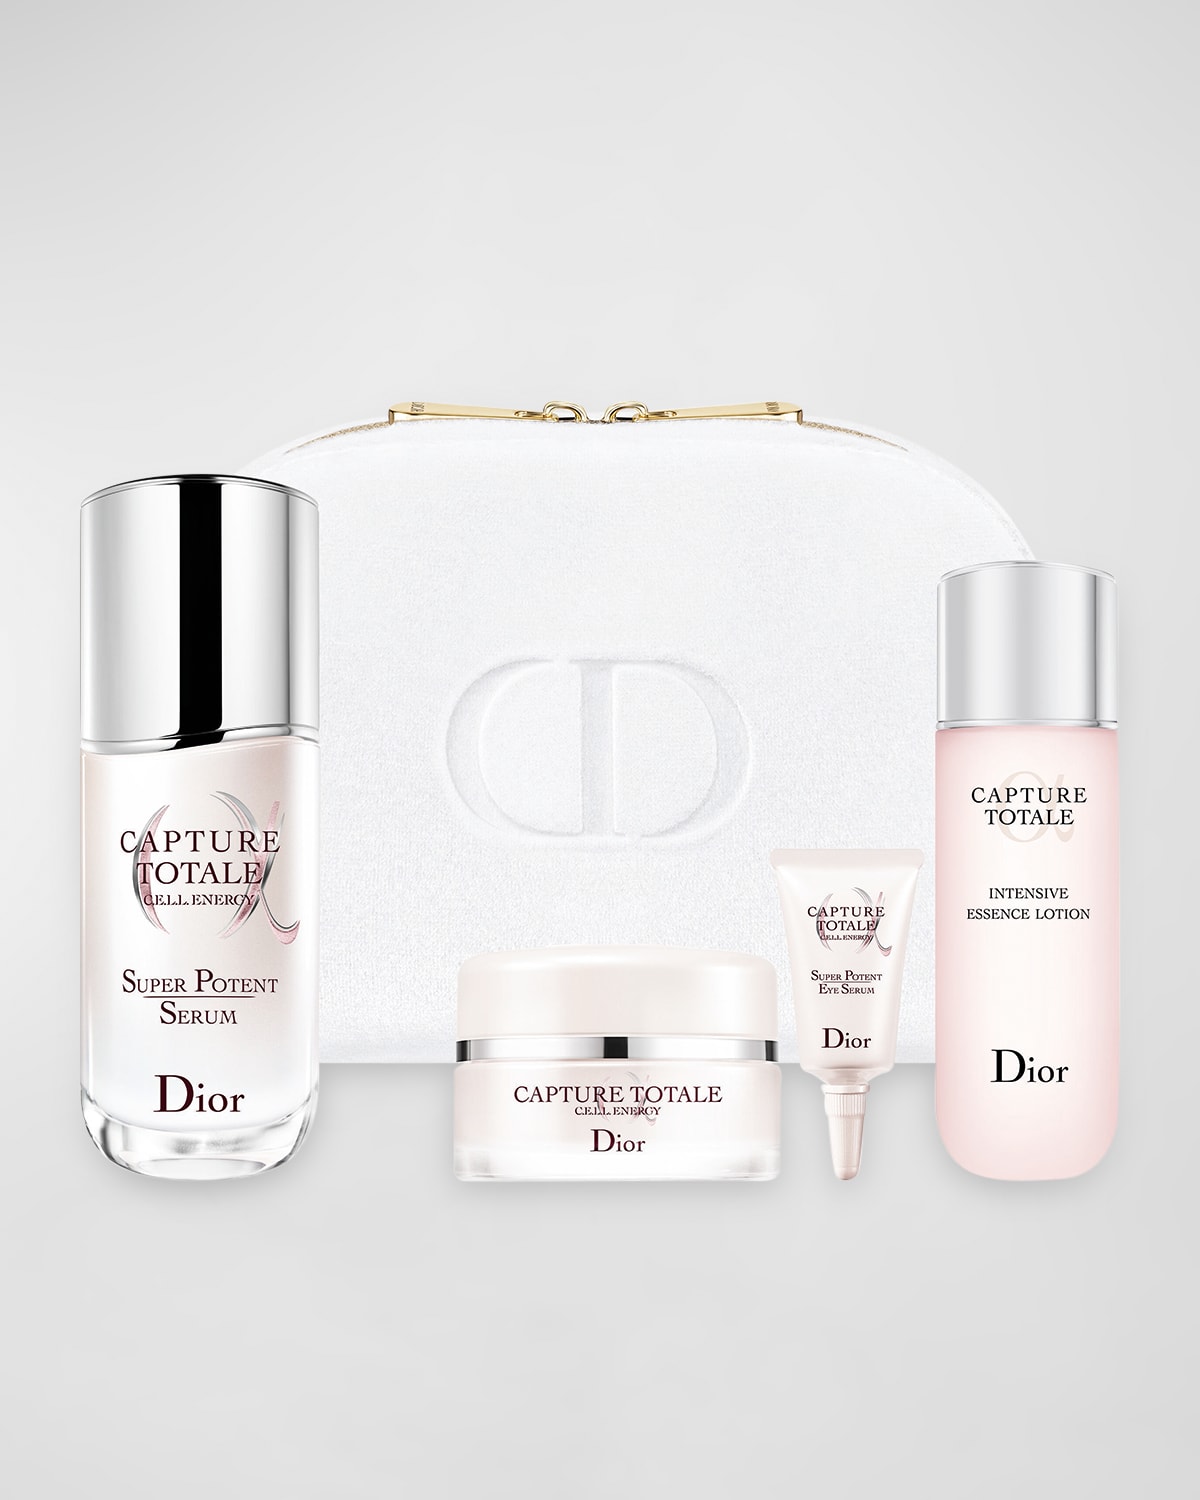 Dior Limited Edition Capture Totale Anti-Aging Skincare Gift Set